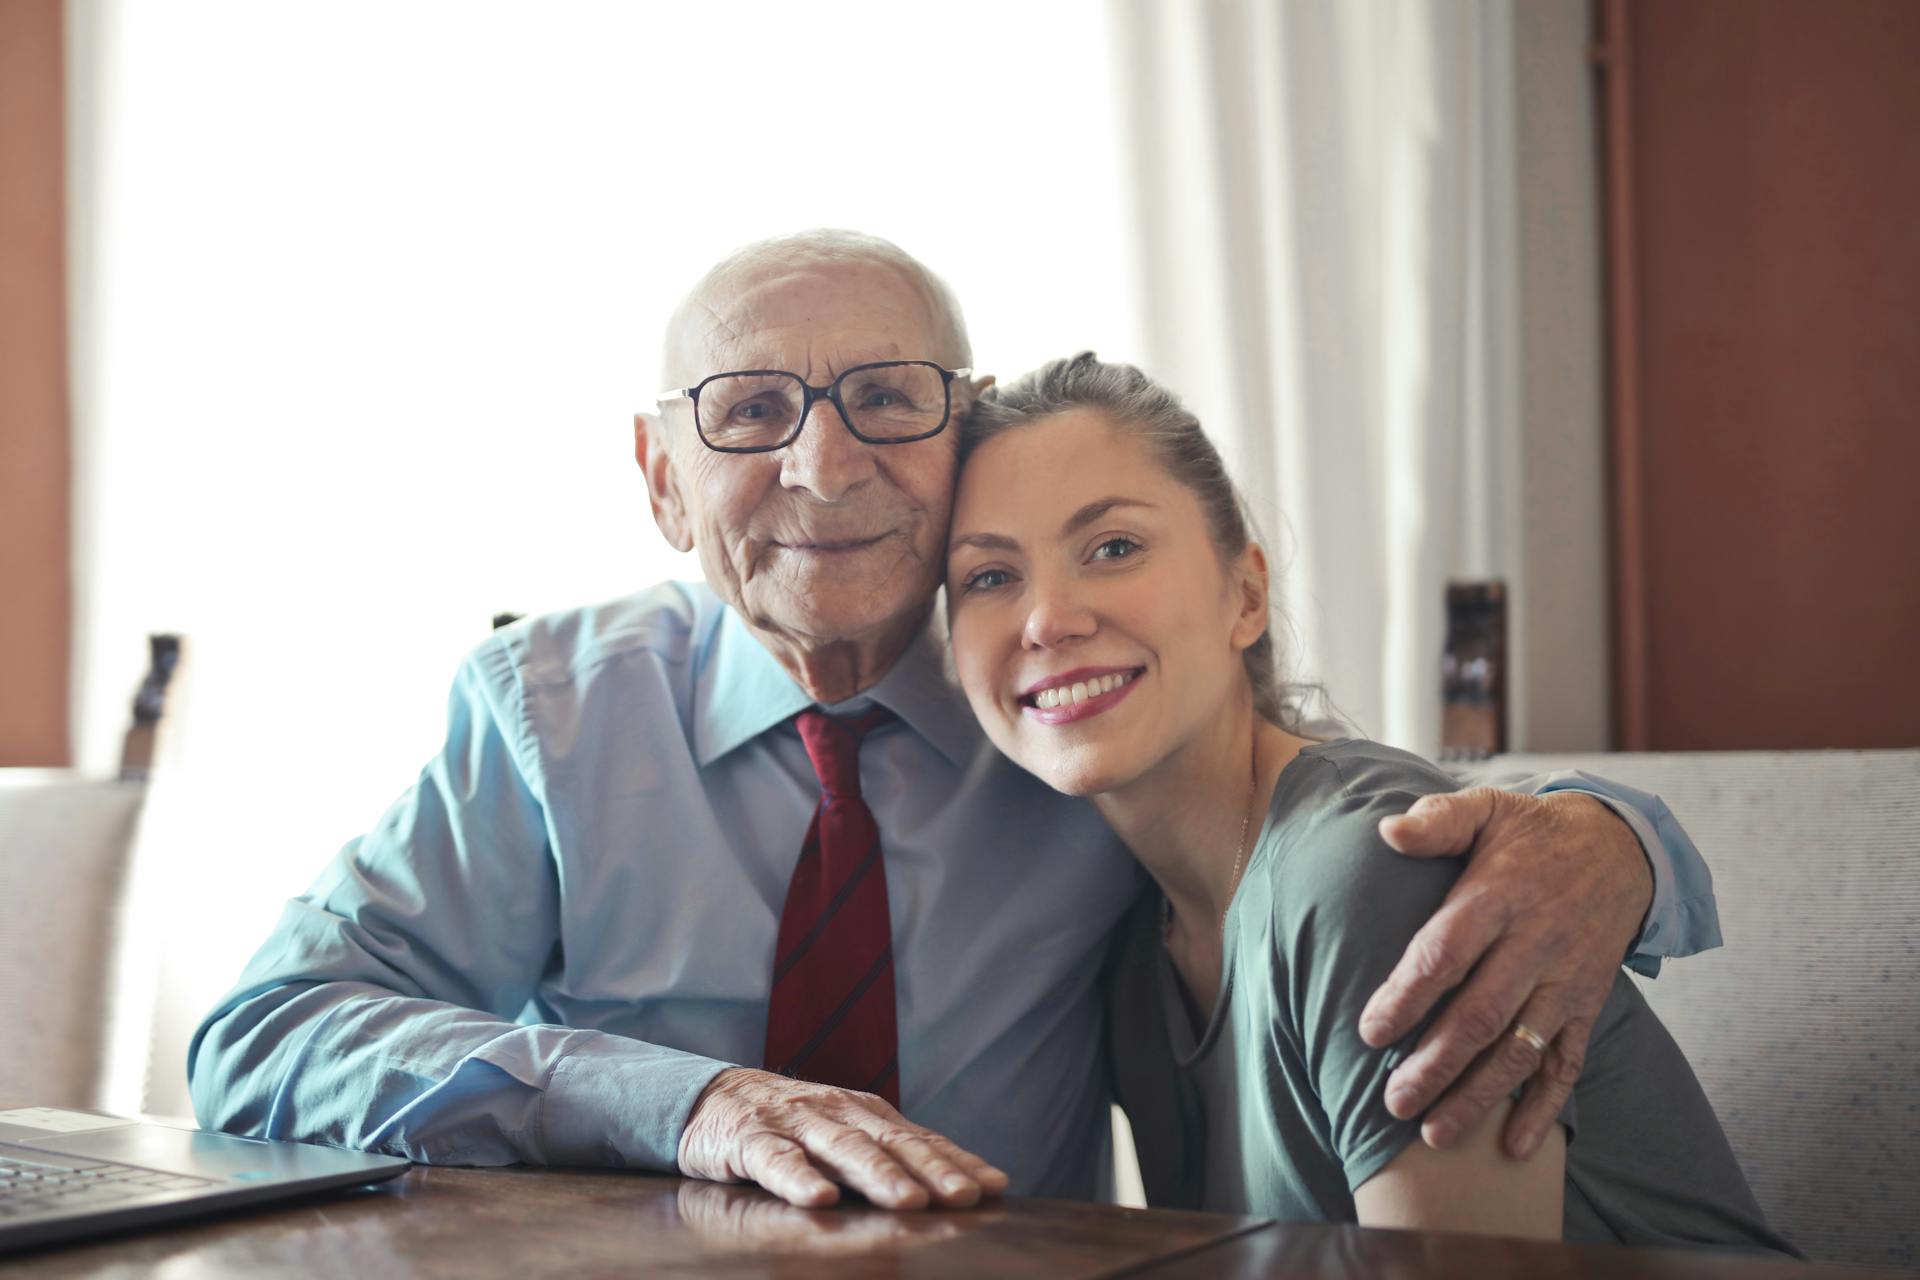 A grandfather and his granddaughter | Source: Pexels